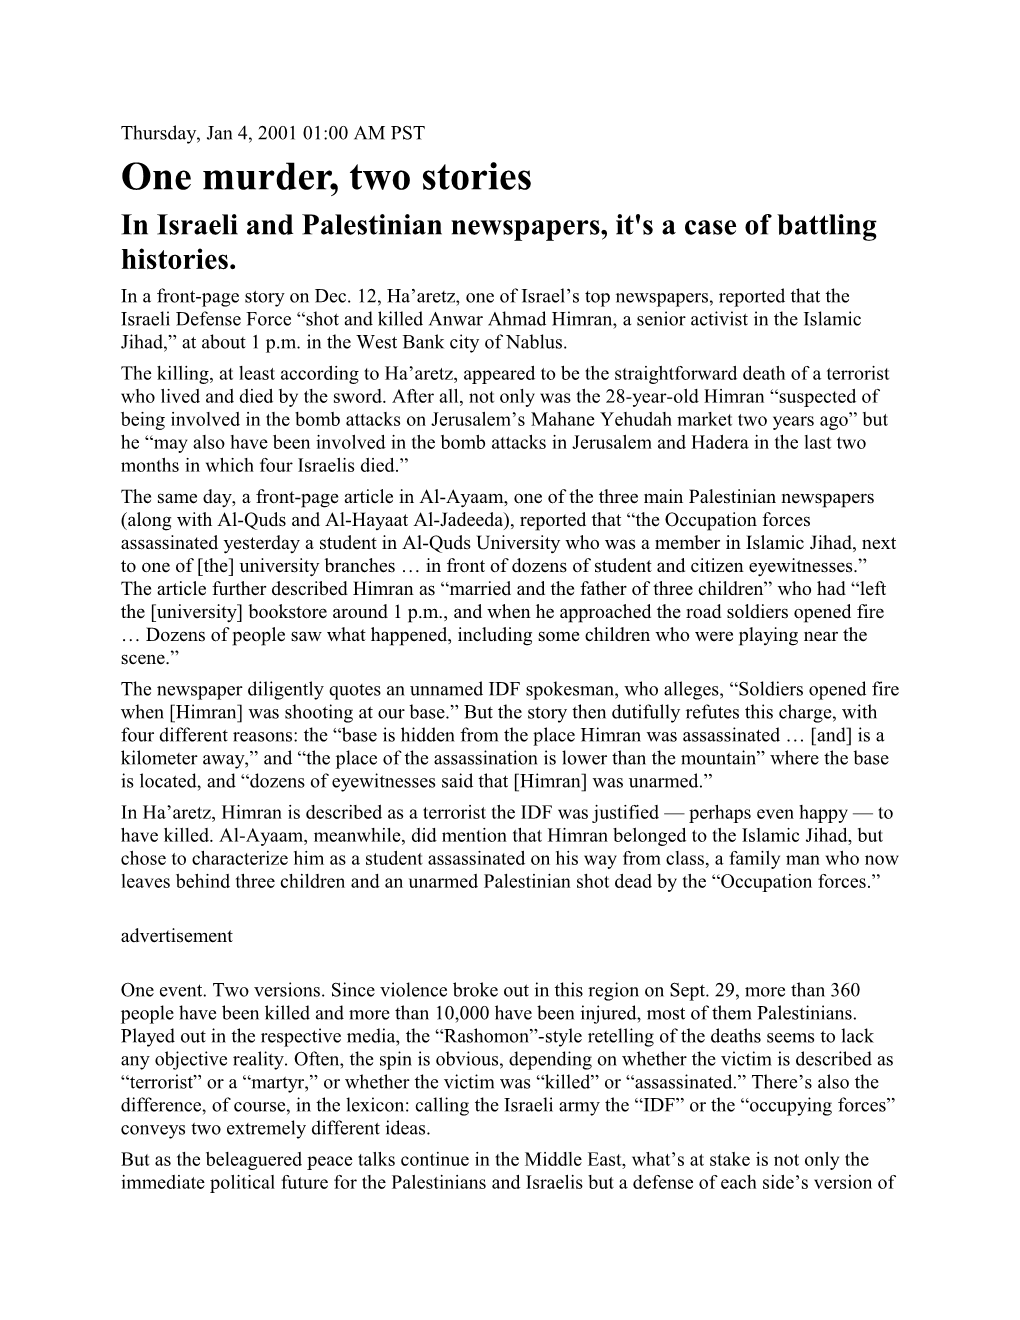 One Murder, Two Stories